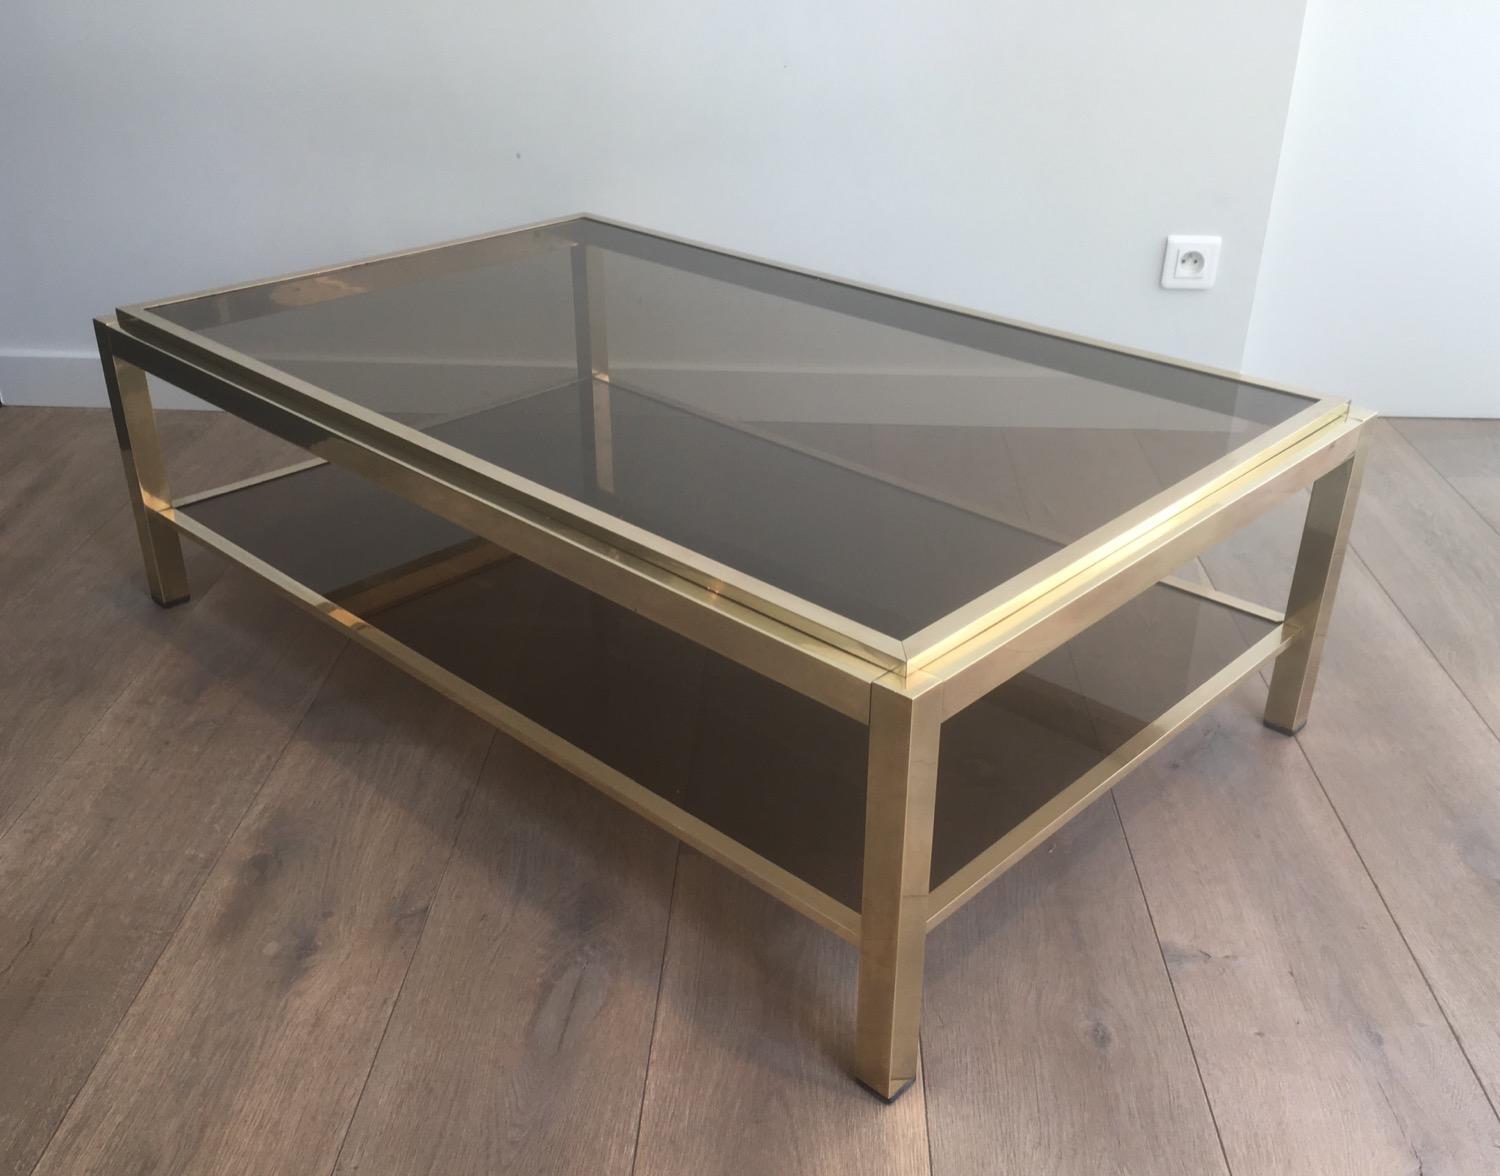 Attributed to Willy Rizzo. Exceptional Very large brass coffee table with smoked glass shelves, circa 1970.